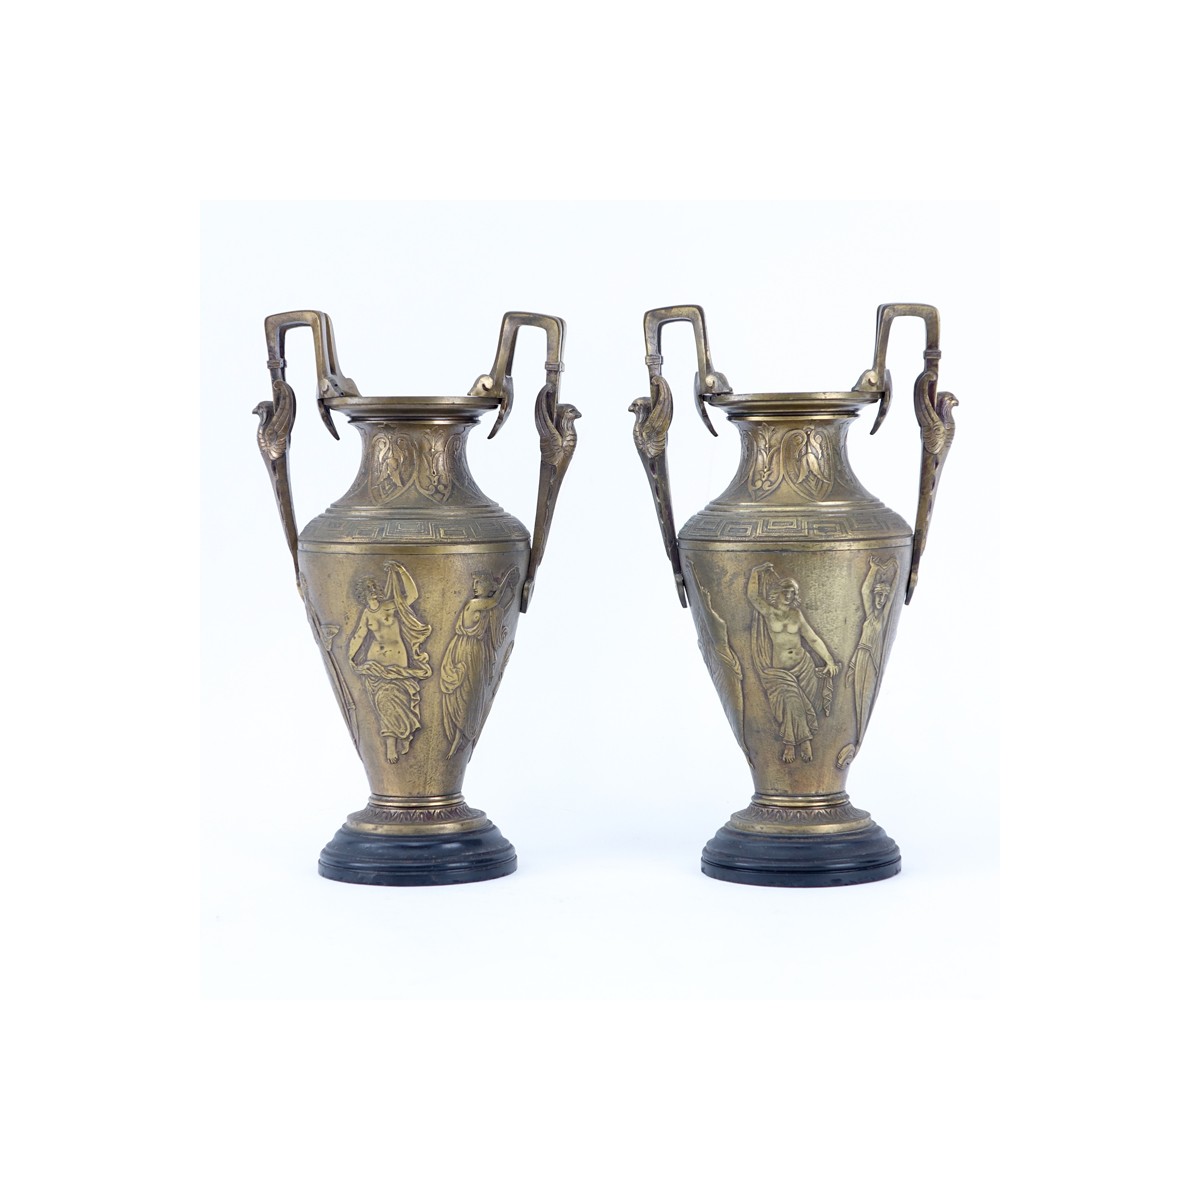 Pair of Gilt Bronze Neoclassical Style Urns. Features draped female figures